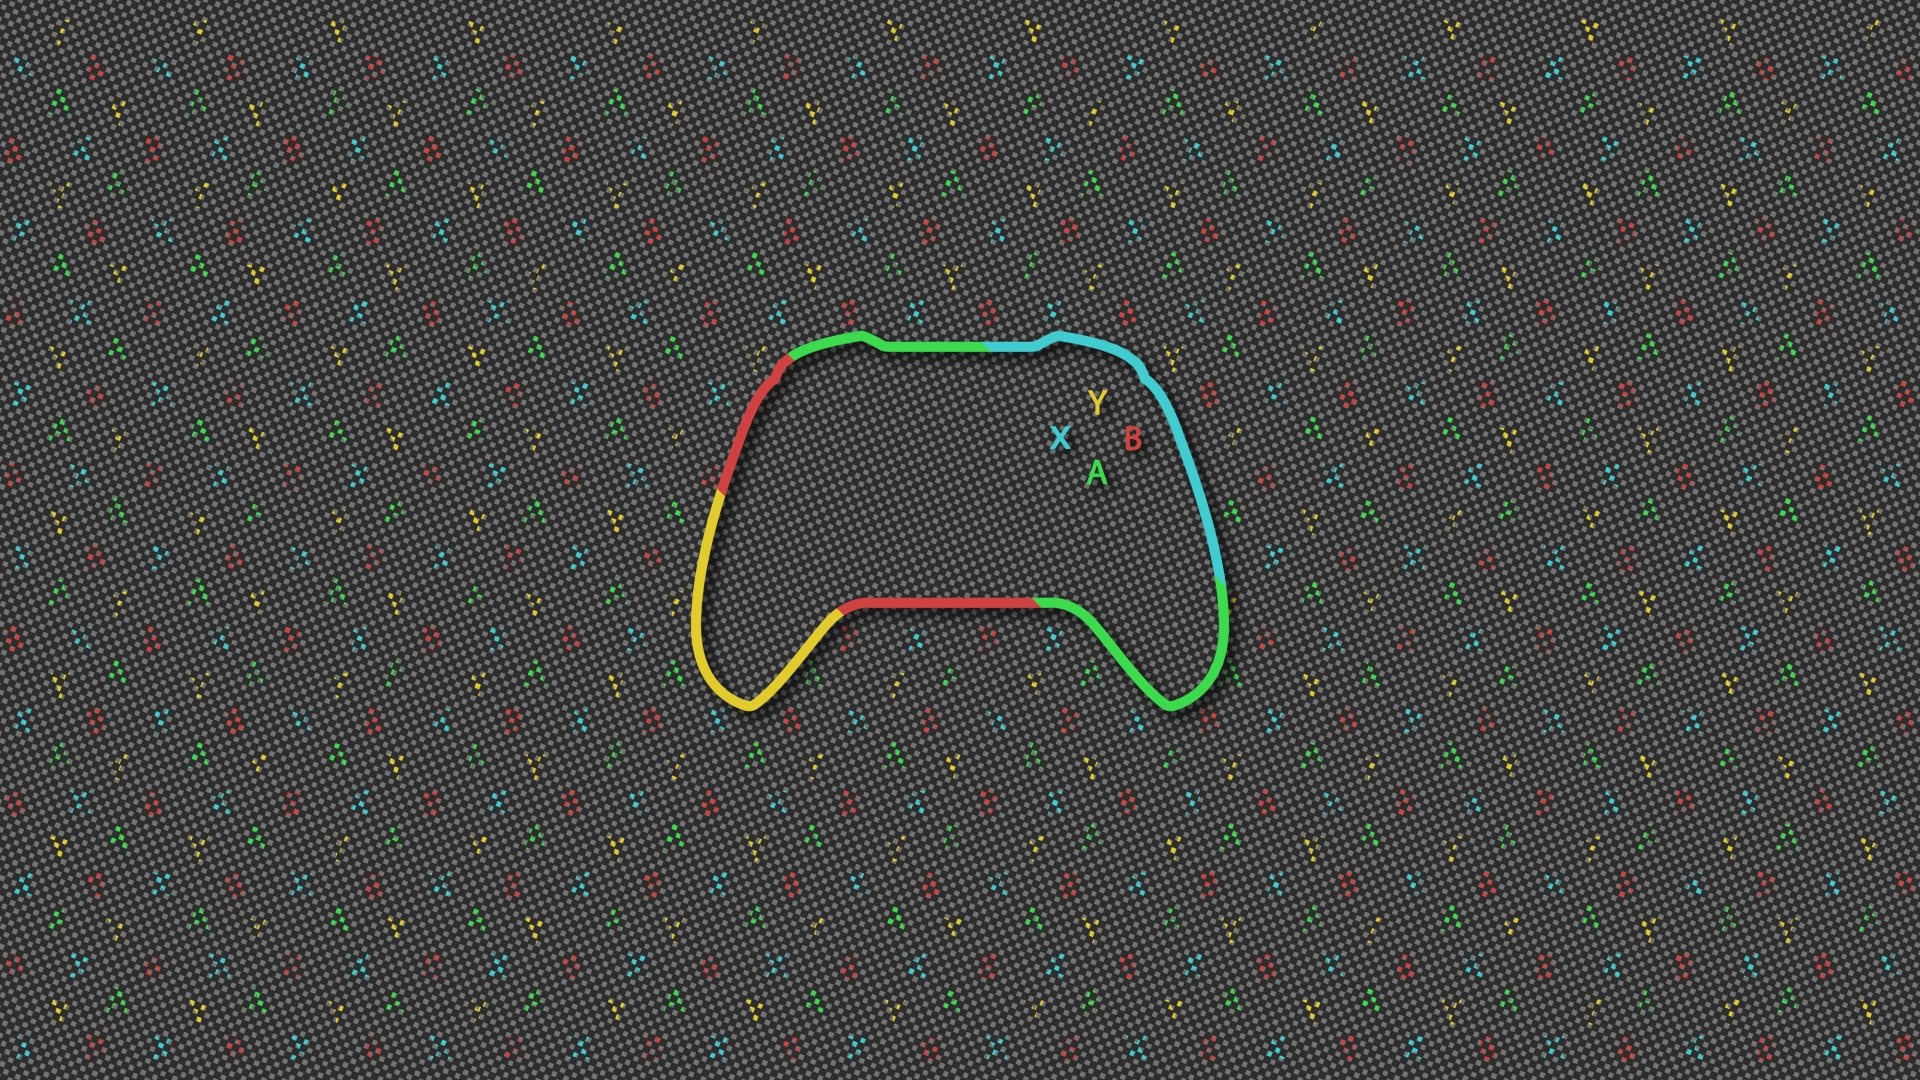 Xbox: Wireless controller for a video game console, ABXY buttons, Minimalistic. 1920x1080 Full HD Wallpaper.